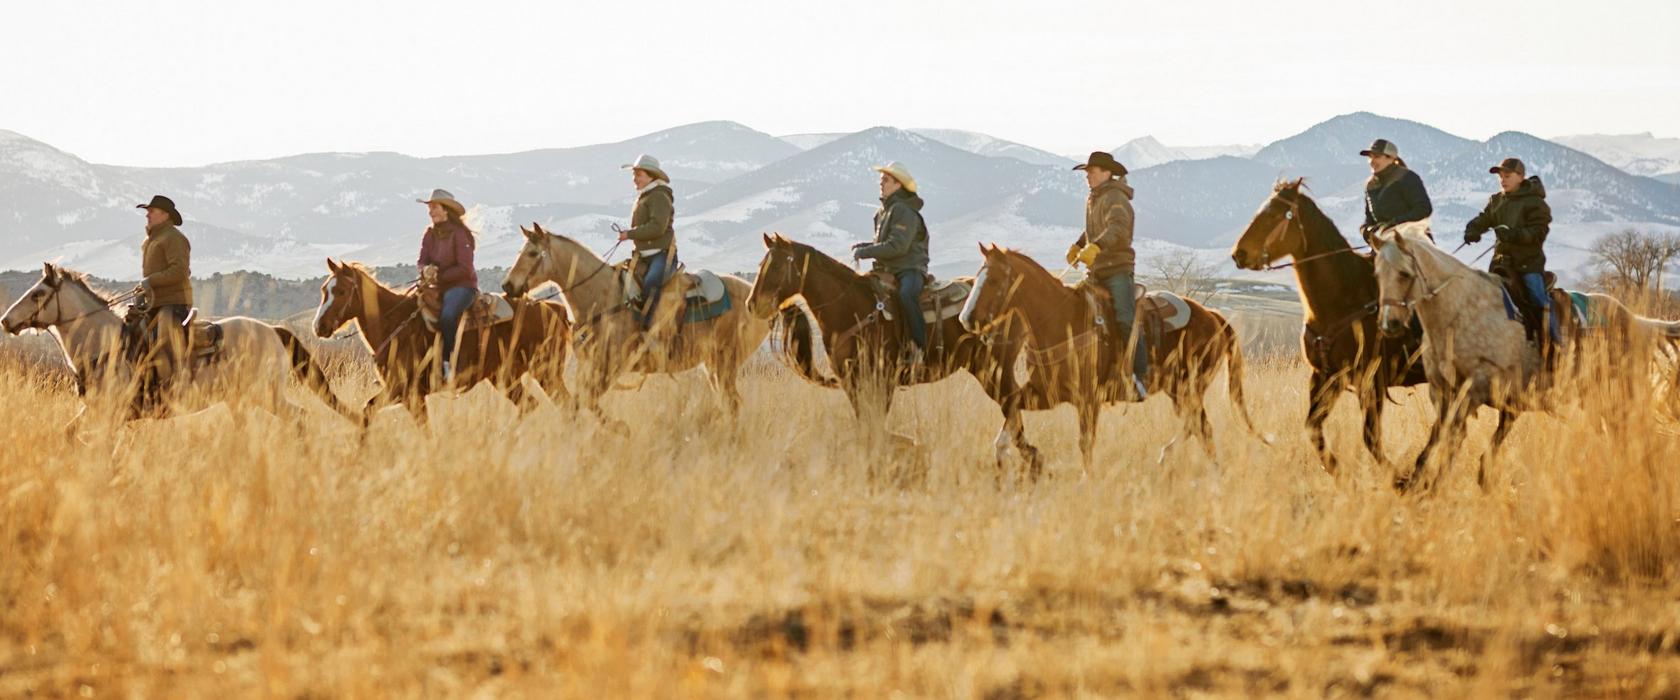 Family on horses in Ariat Clothing and Footwear